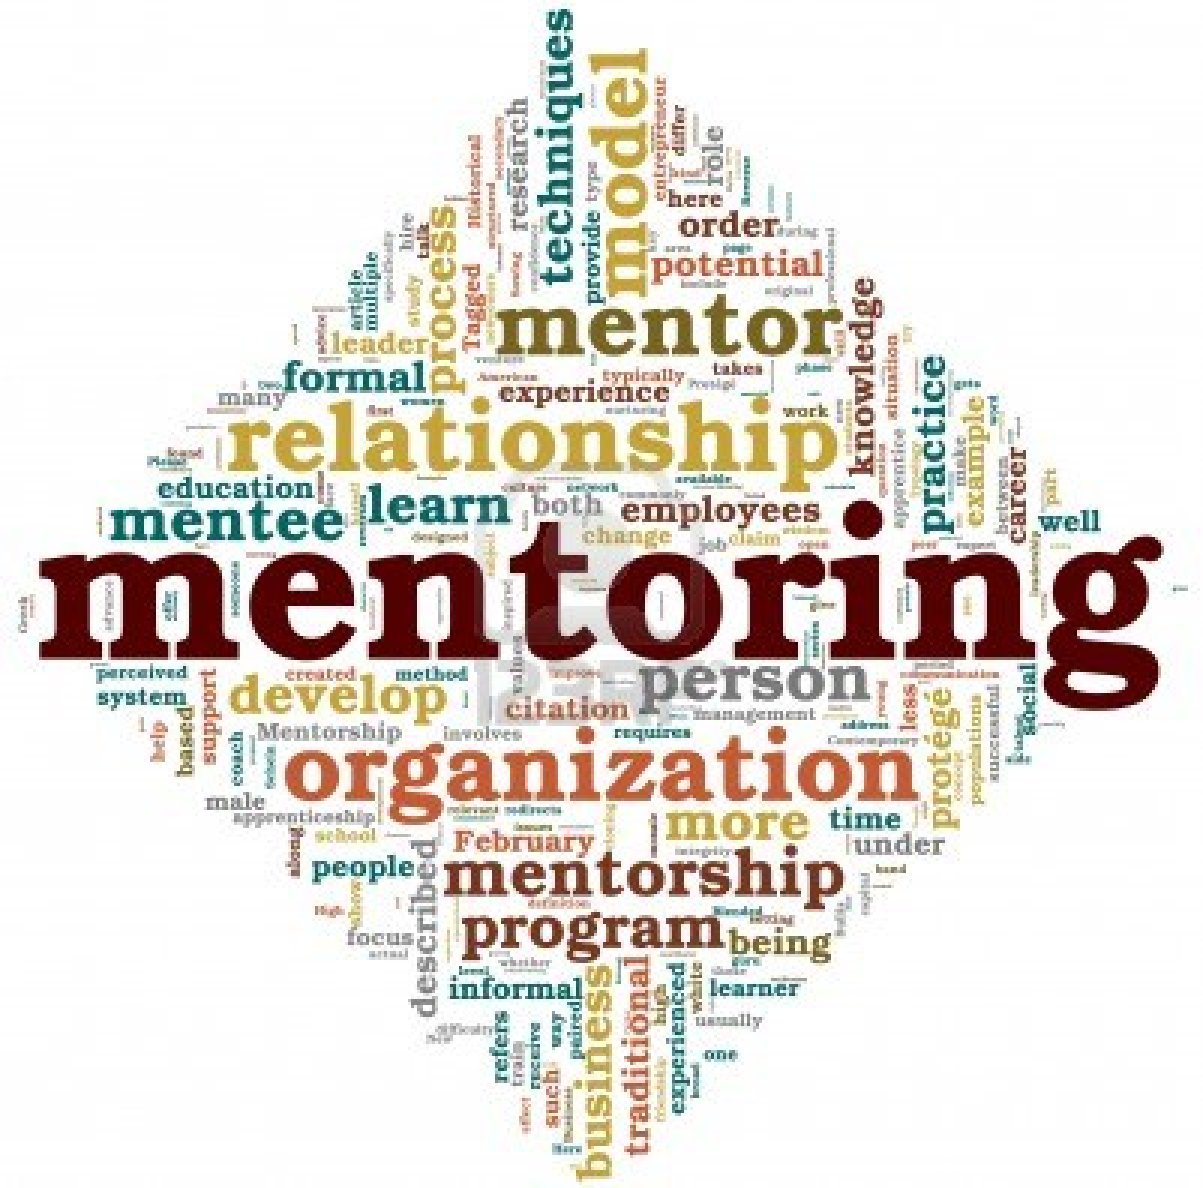 Getting the Most out of Mentoring